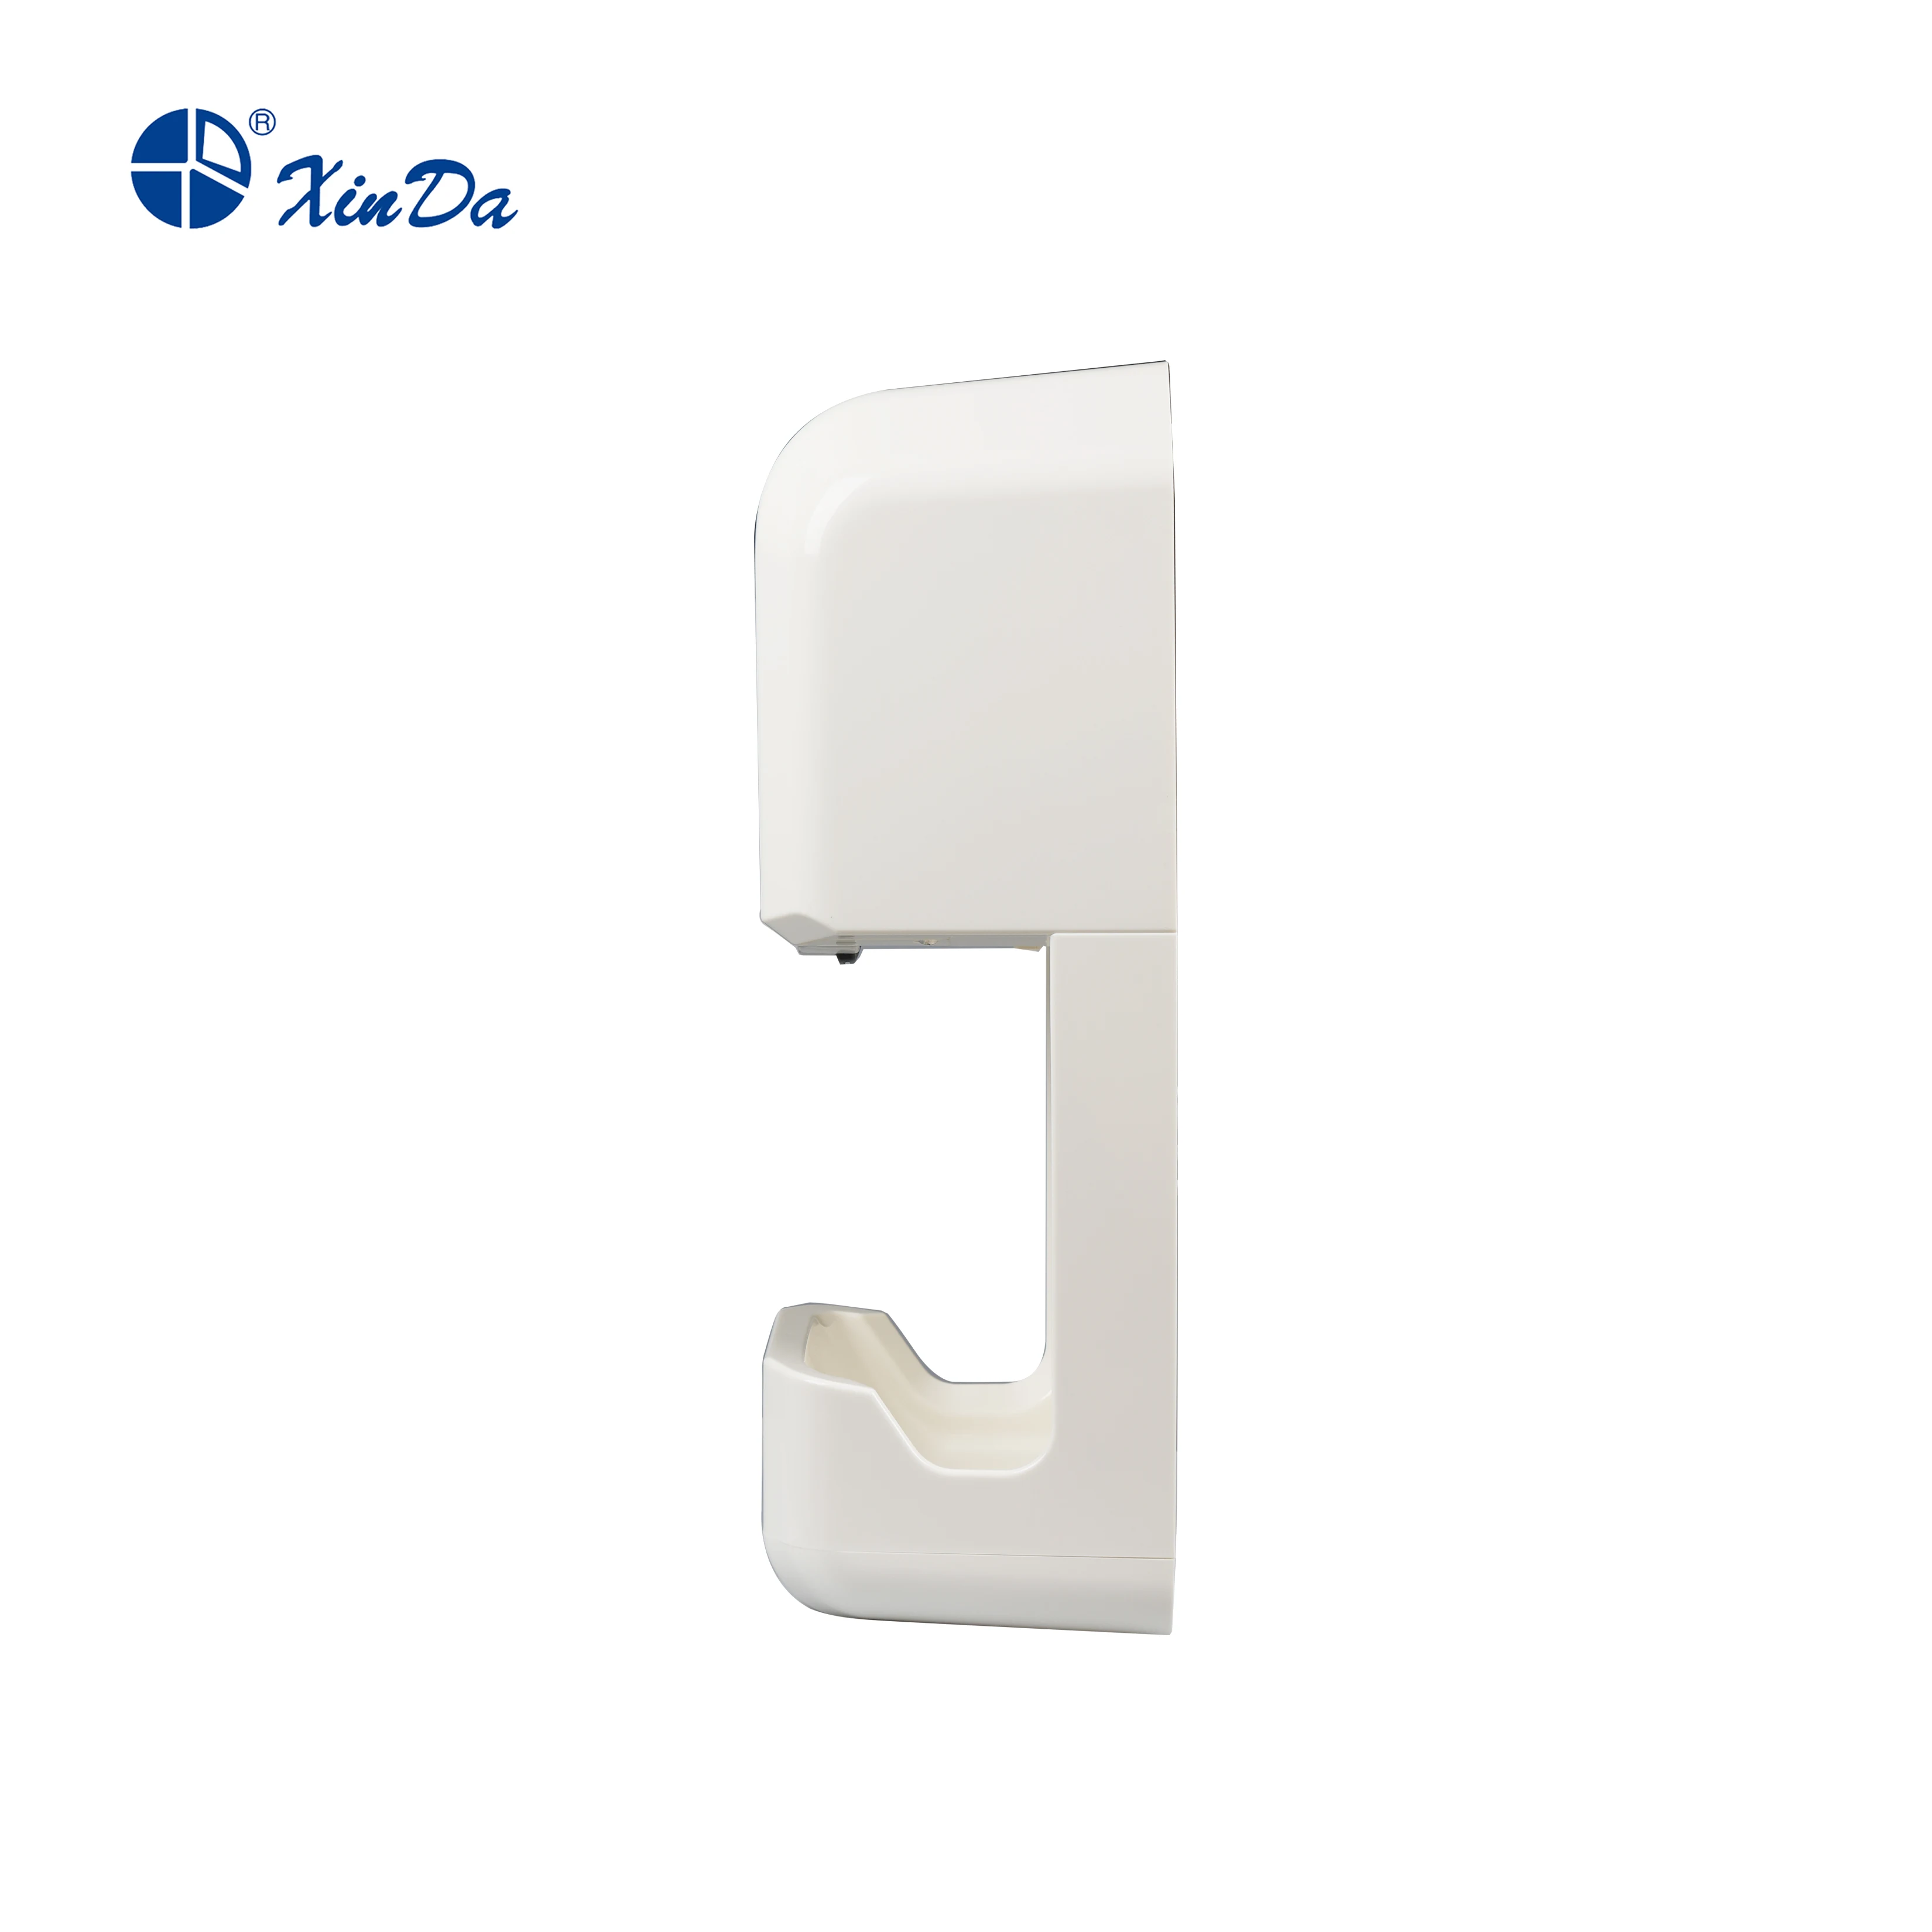 The Xinda GSQ 88 Hand Dryer Stylish(White) Automatic Infrared Induction Sensor with water Tray Collector Wall Mounted